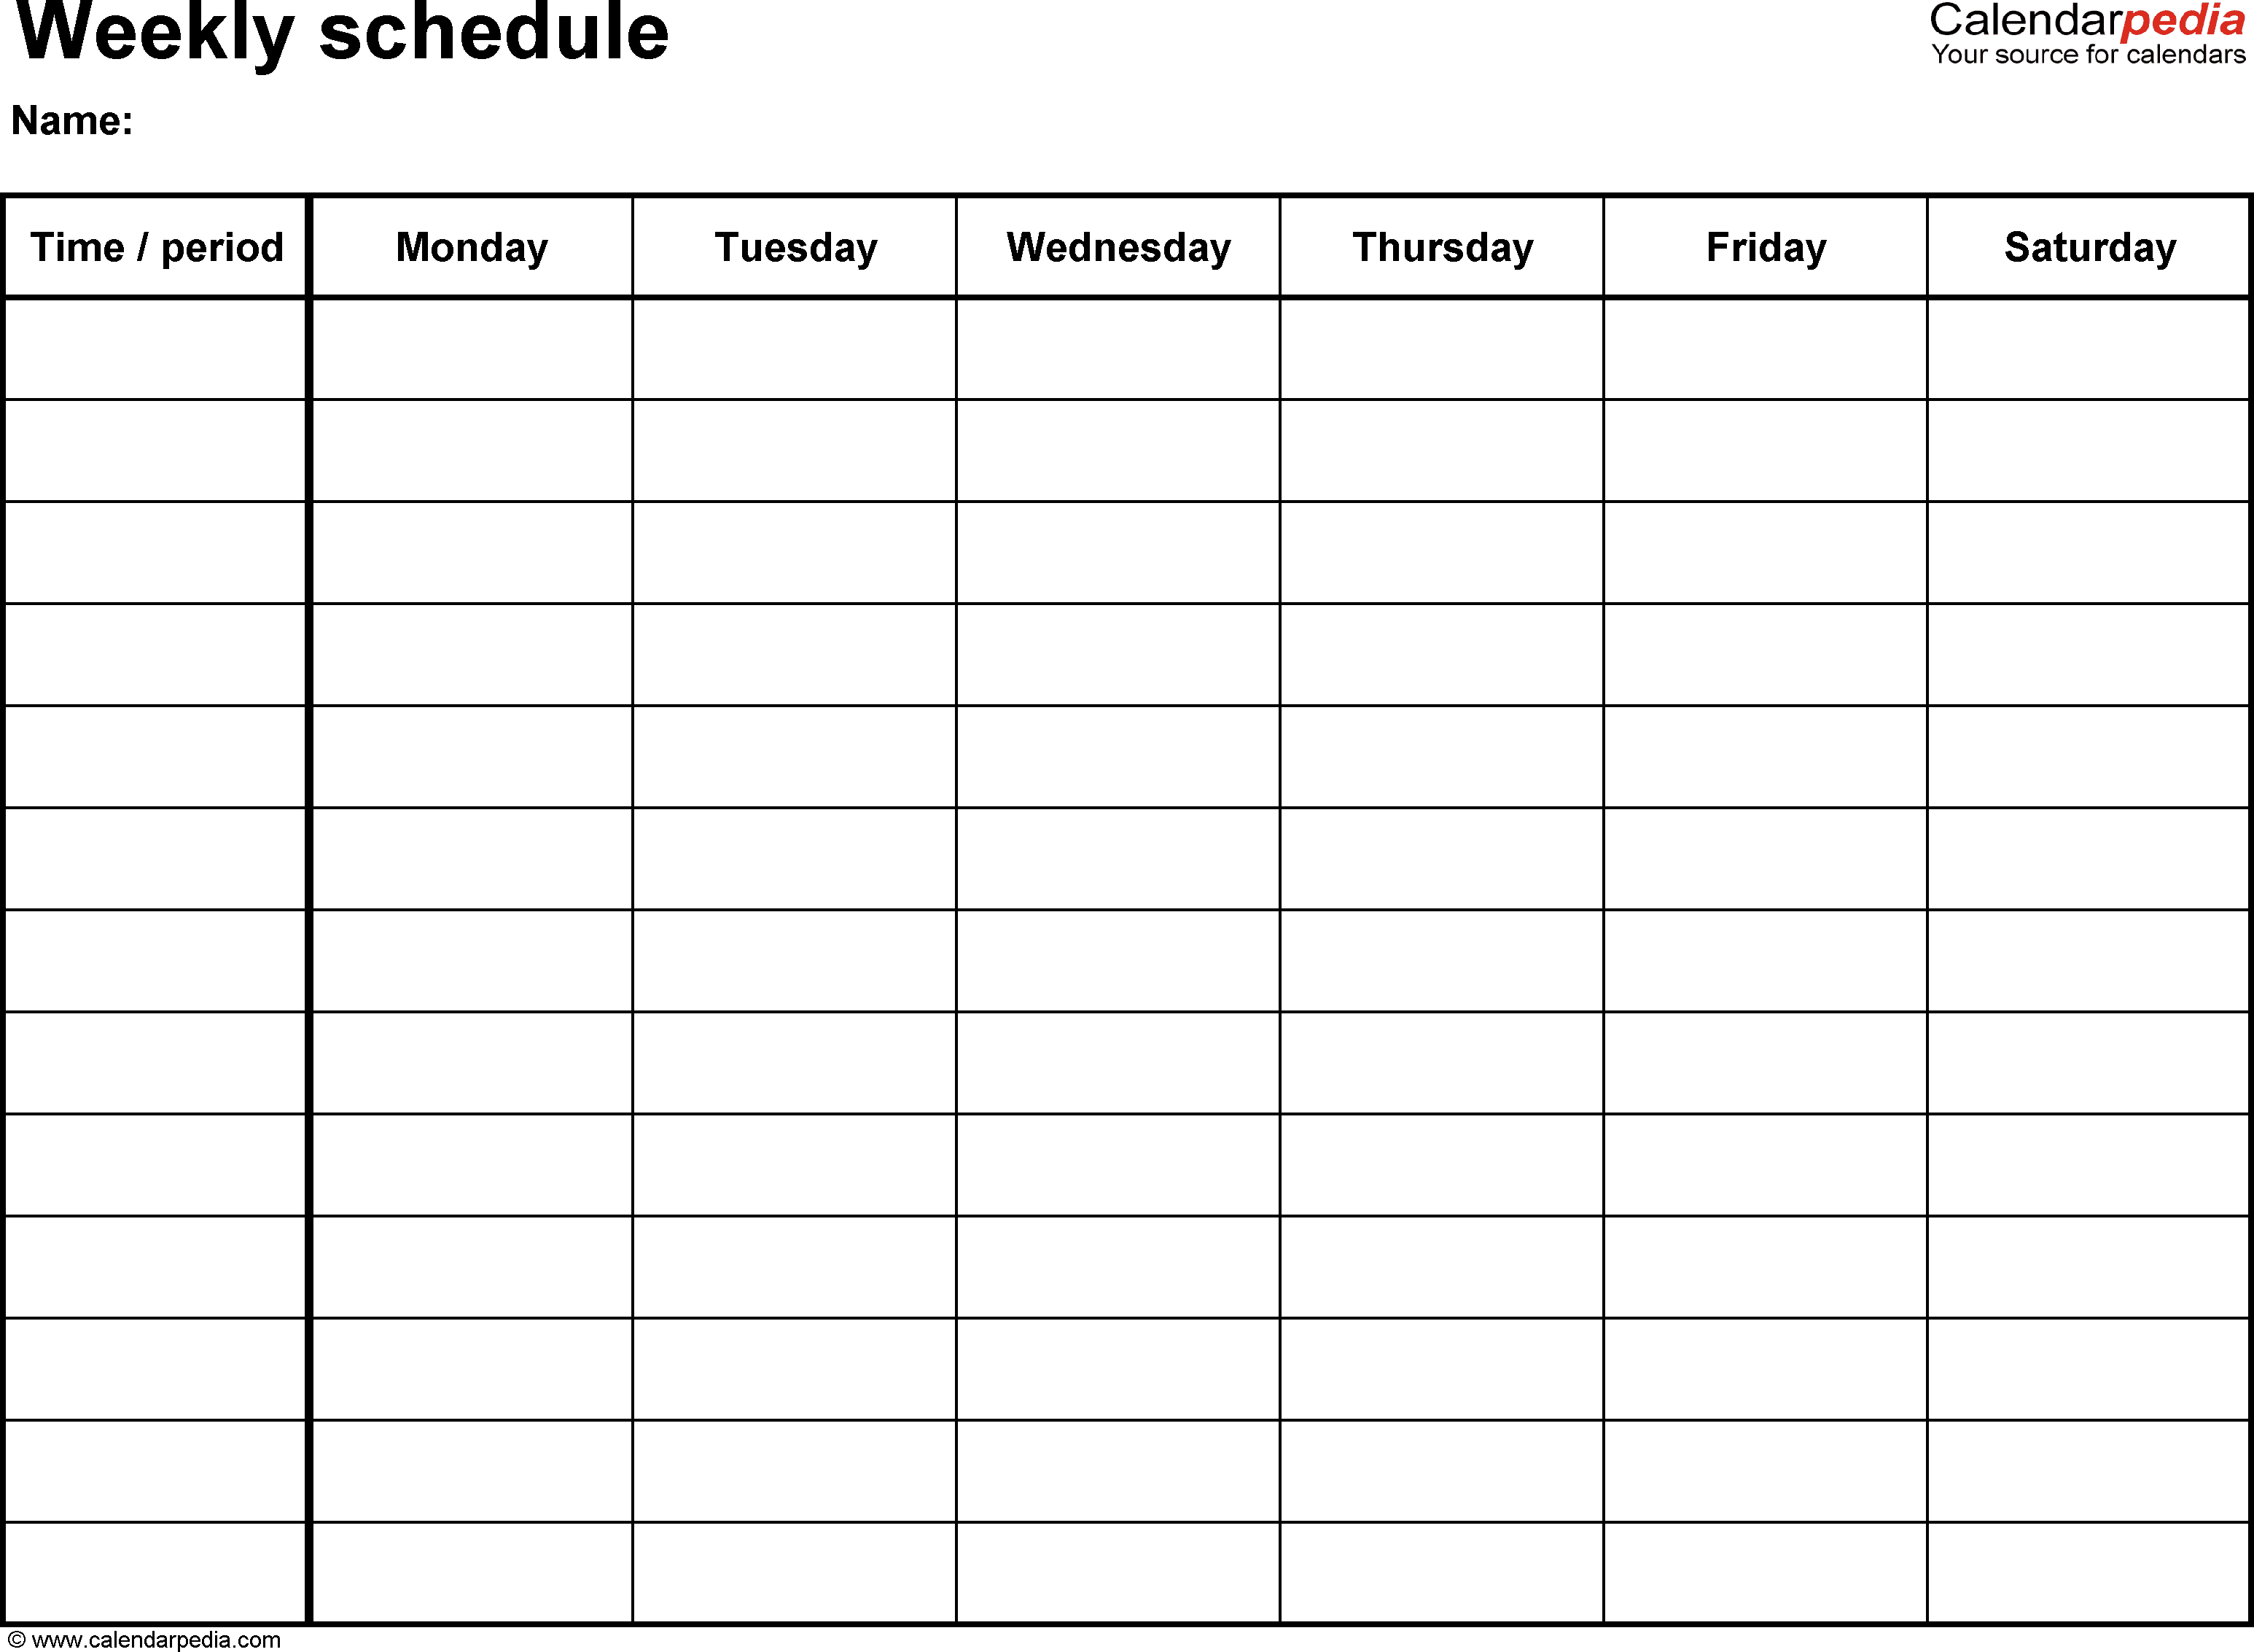 Free Weekly Schedule Templates For Word – 18 Templates With Work Plan Template Word